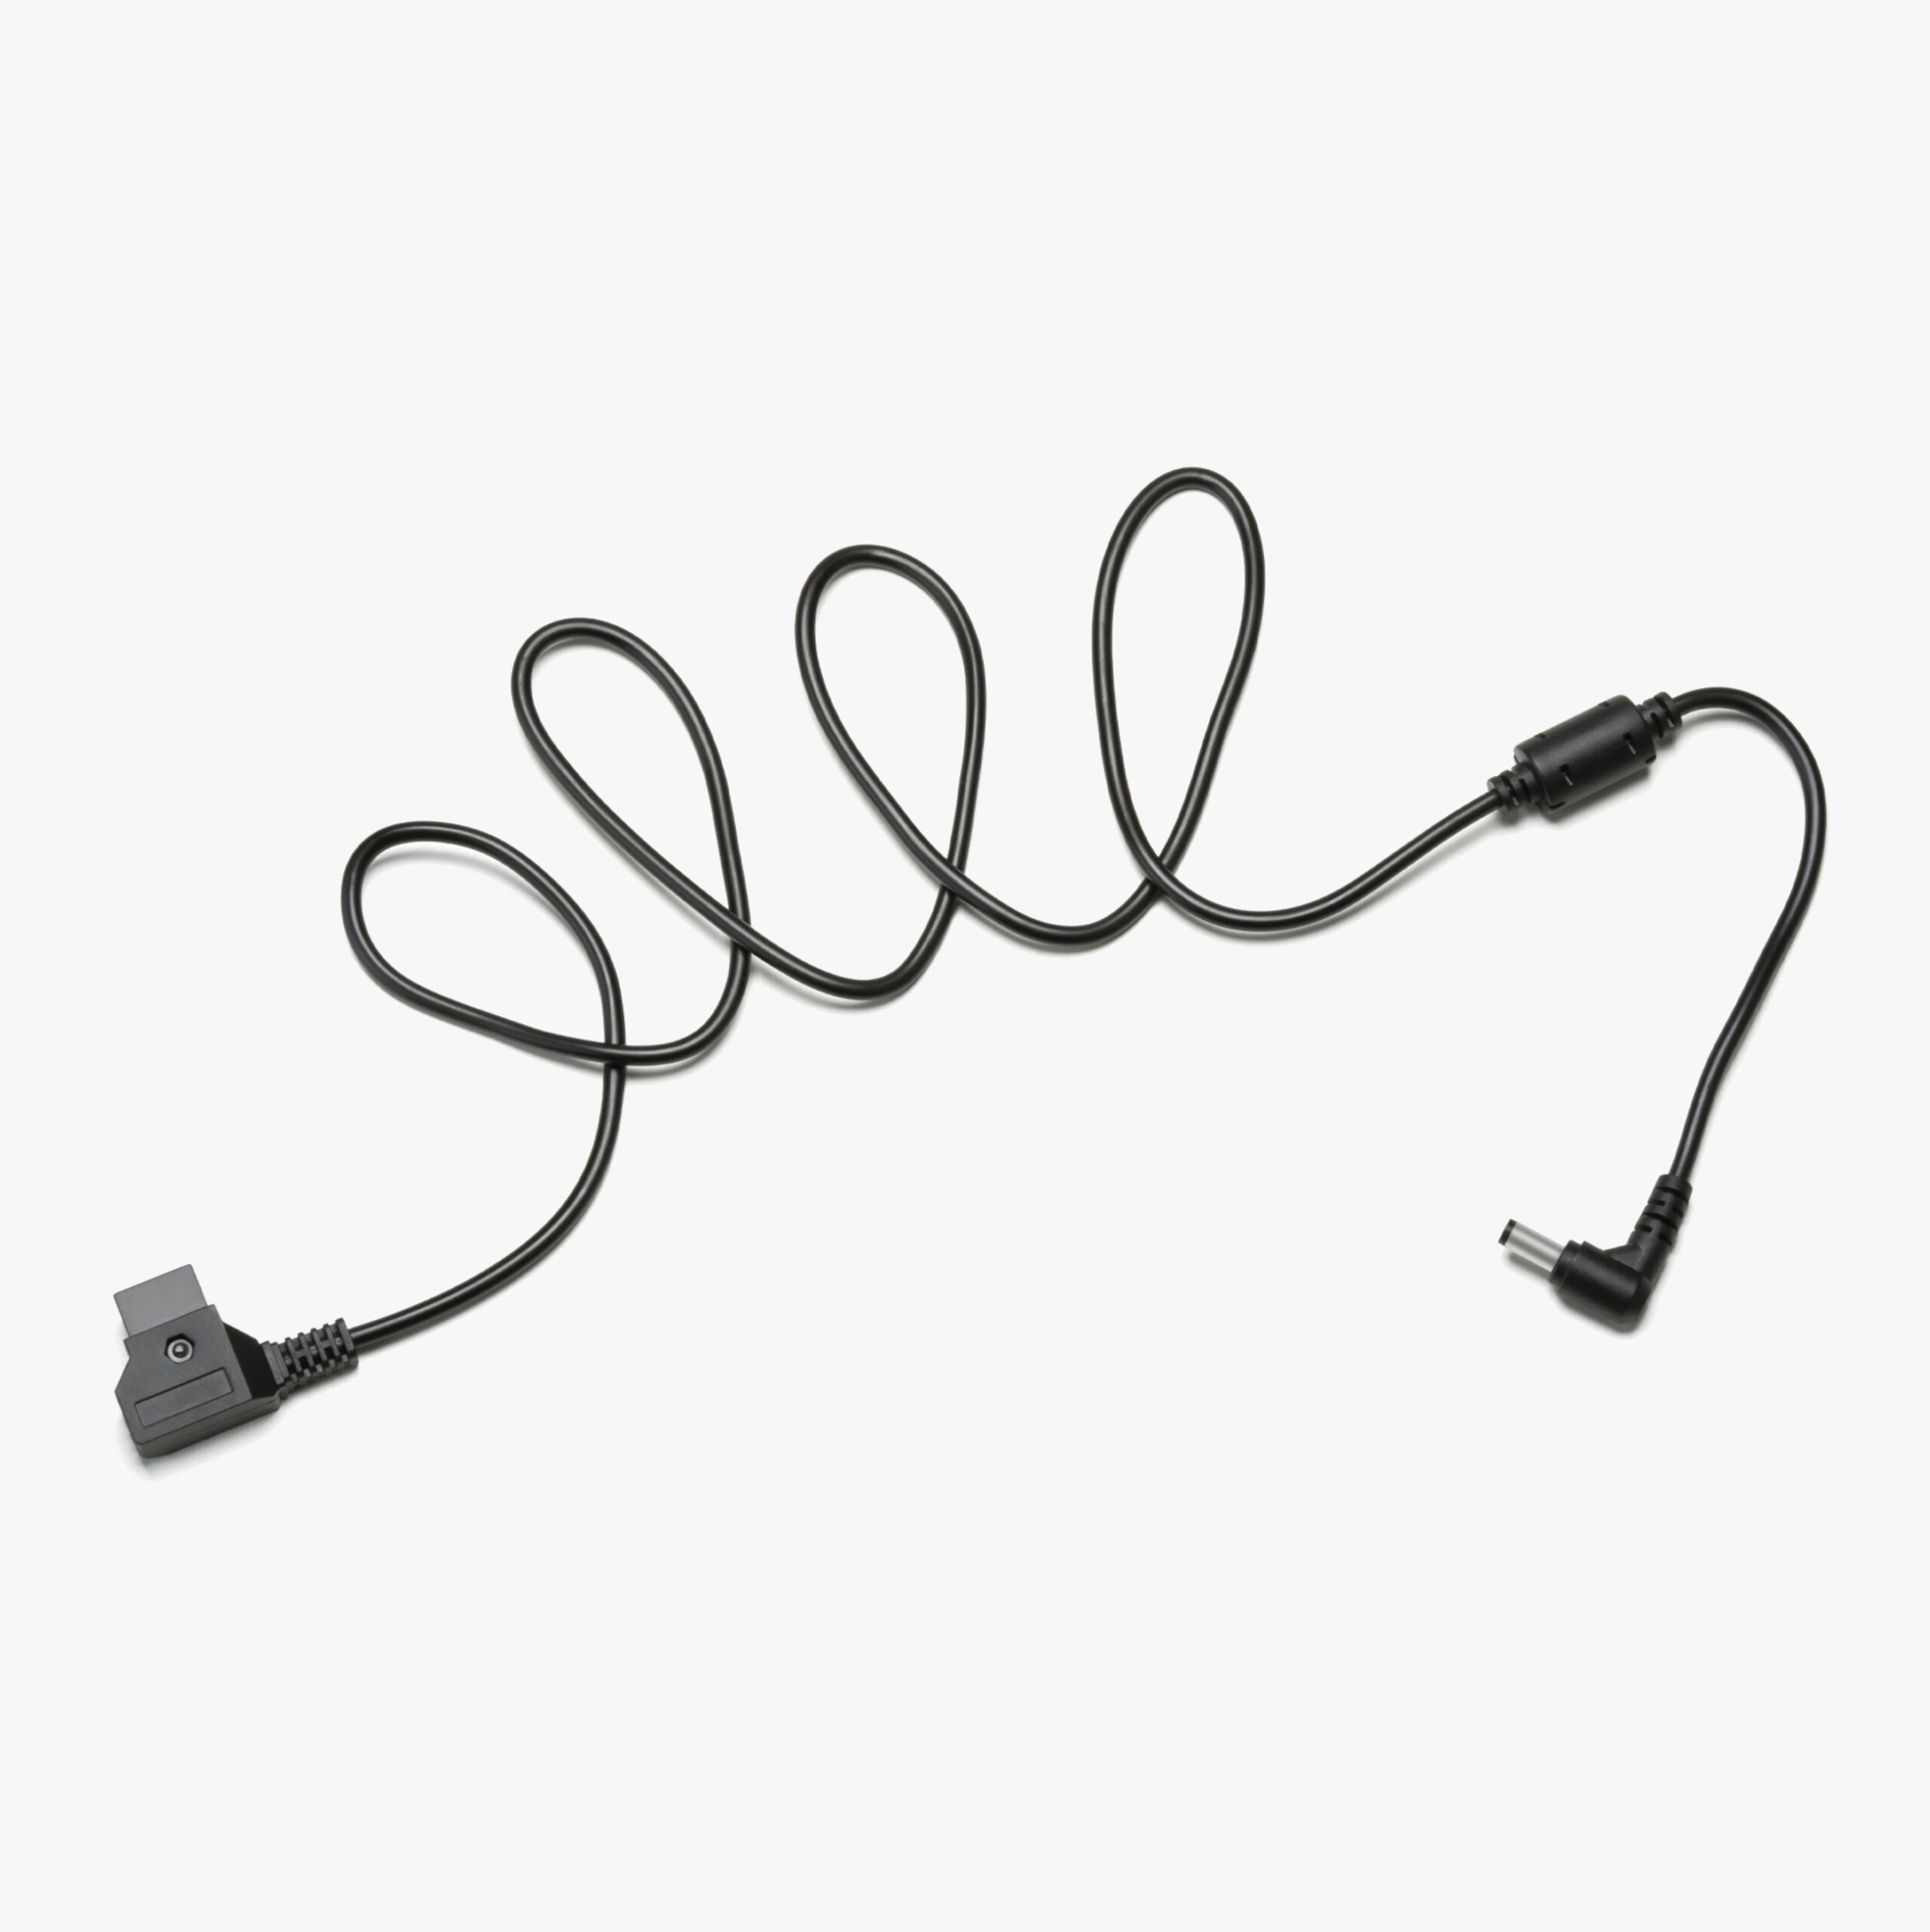 Newell D-Tap power cable for Pravaha